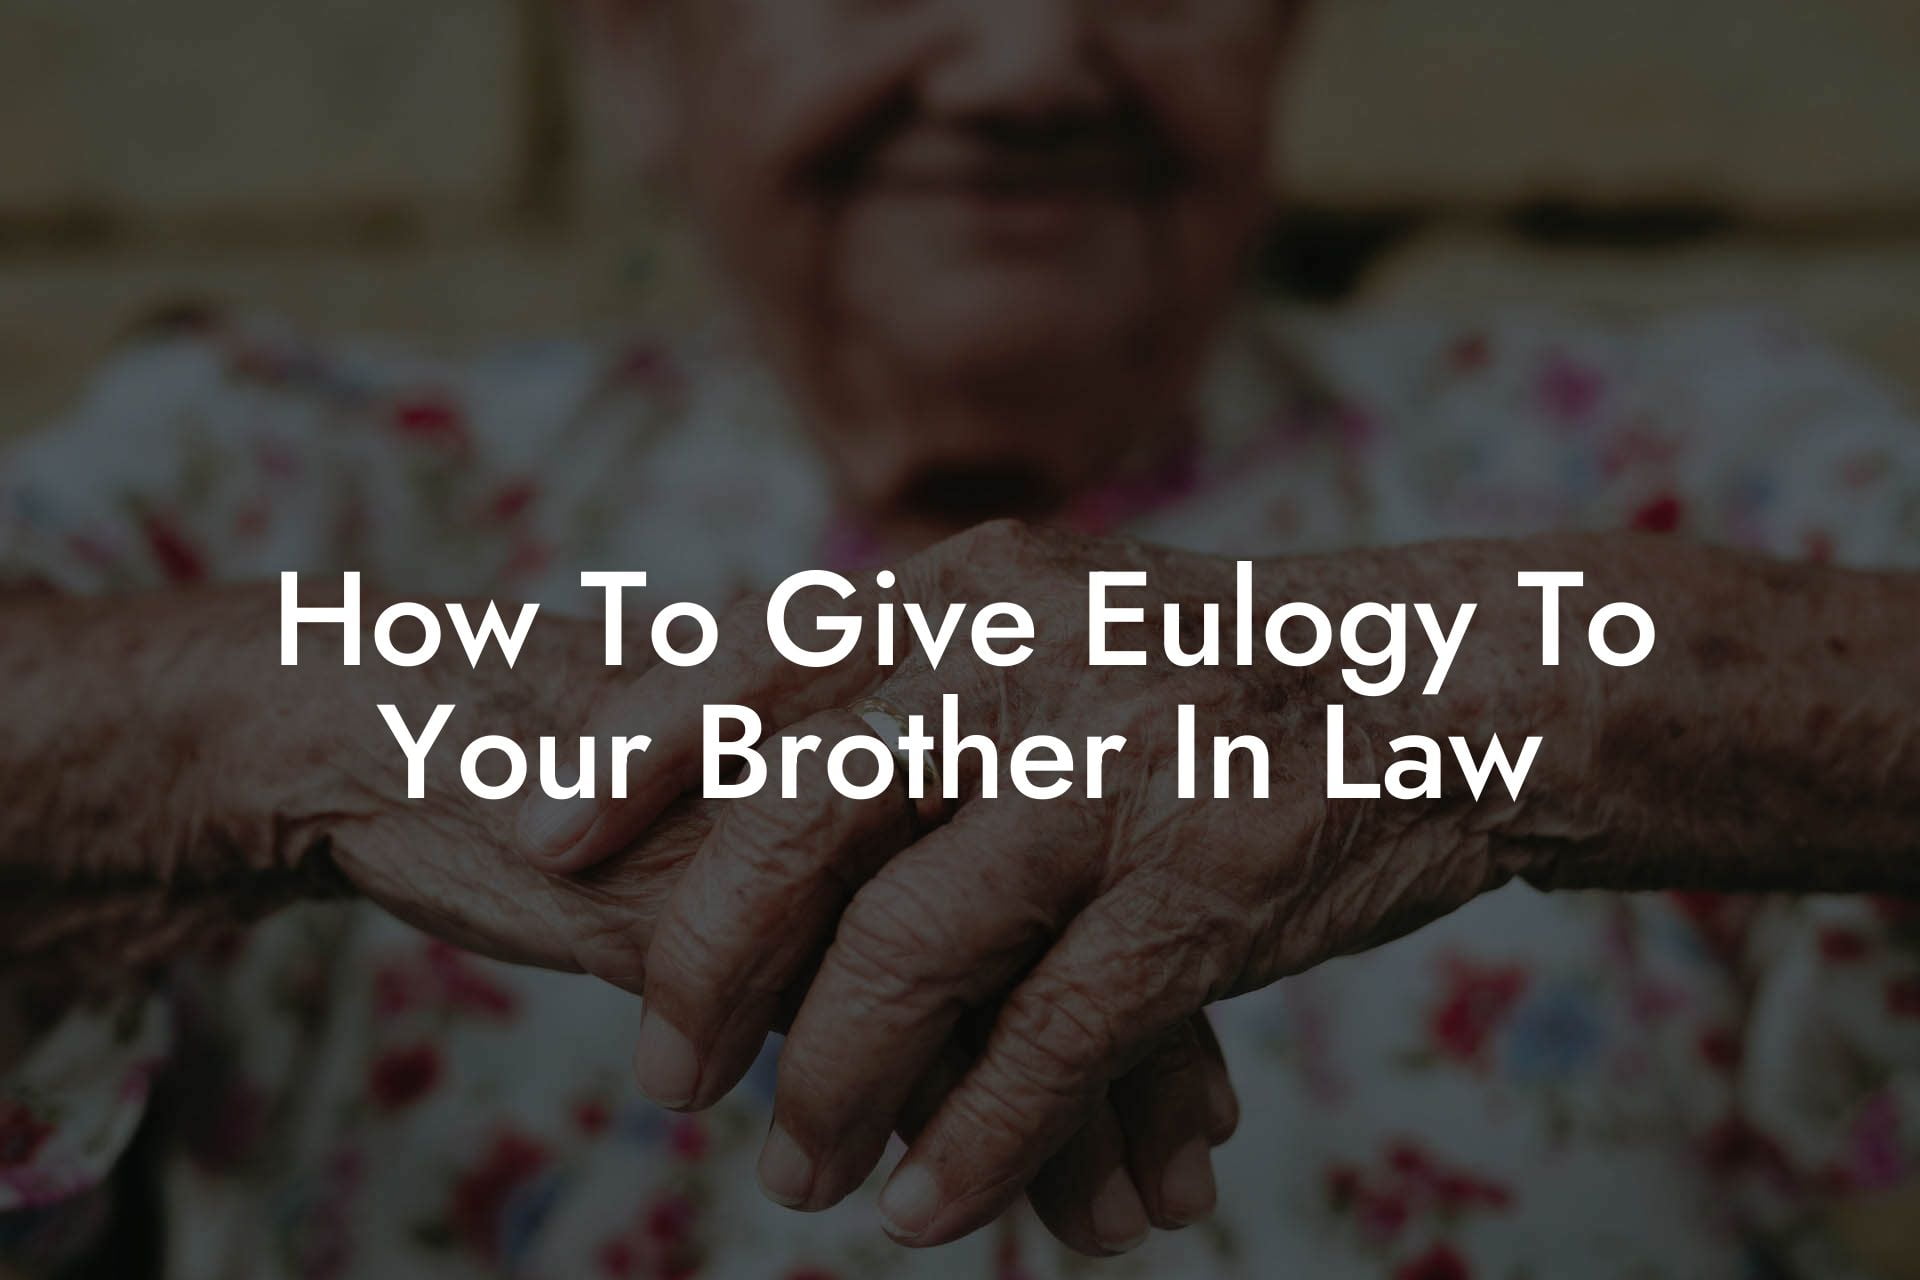 How To Give Eulogy To Your Brother In Law